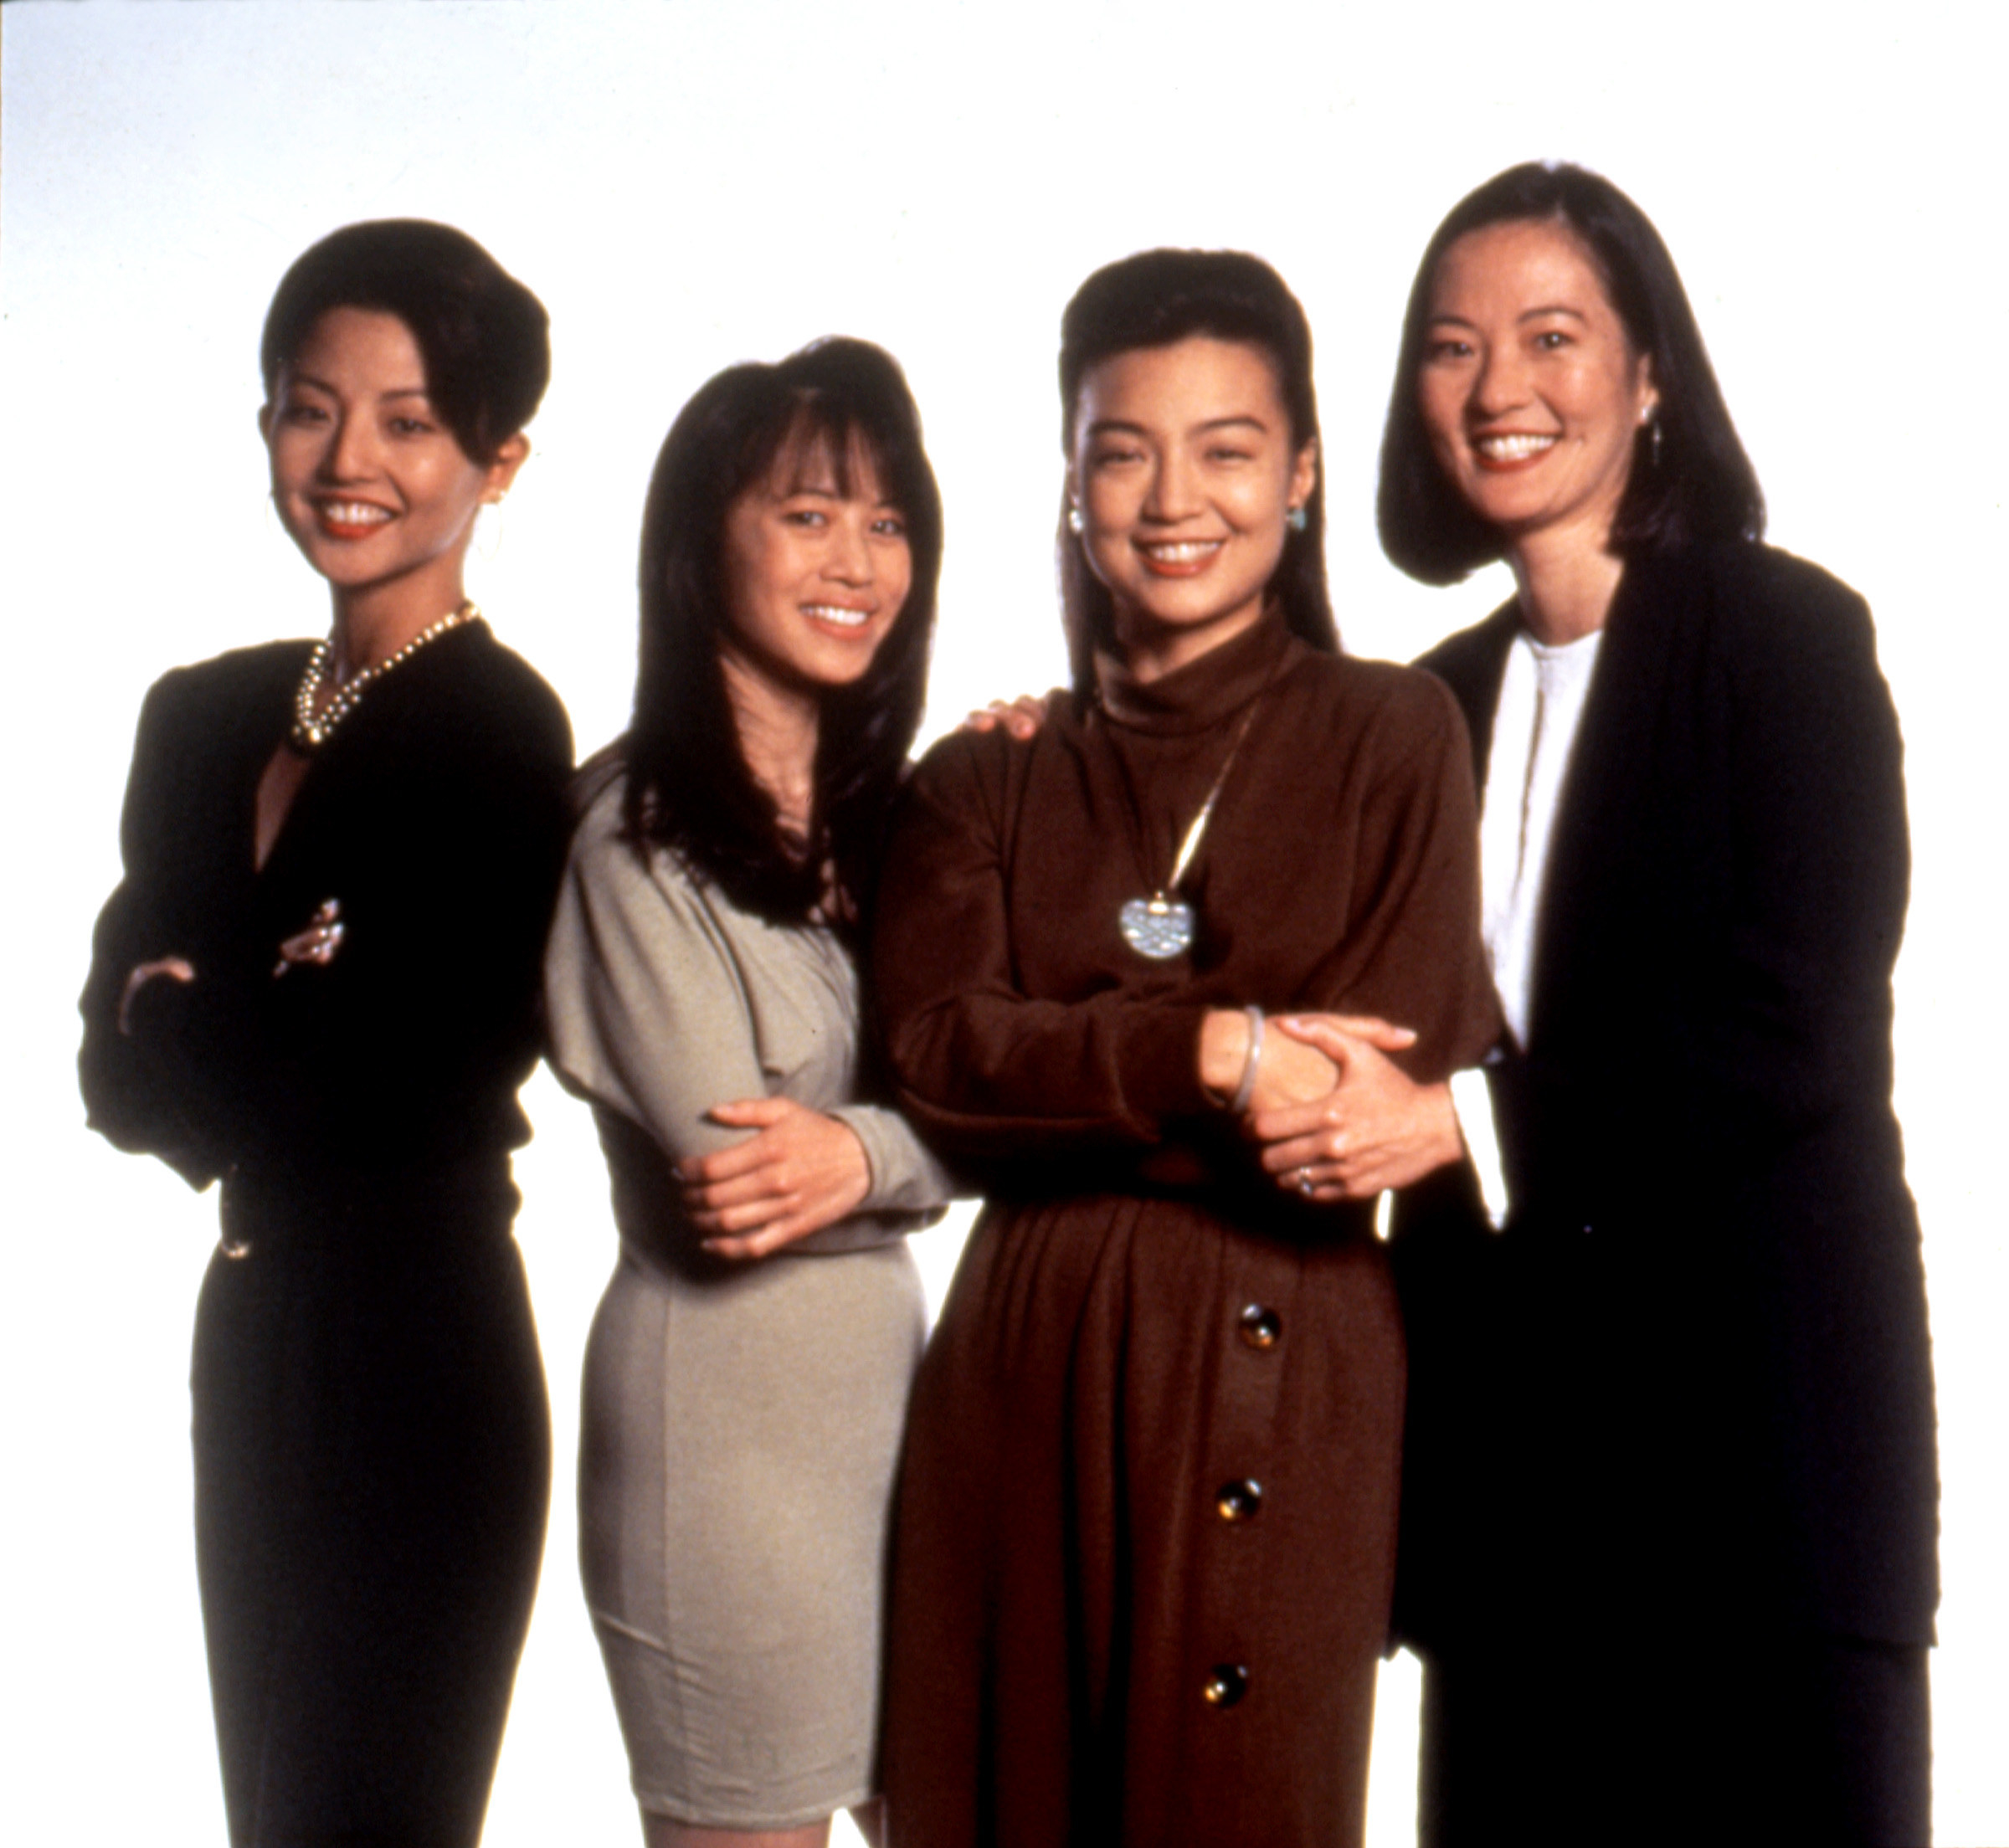 Four women, including Ming-Na Wen and Rosalind Chao, smiling and standing together